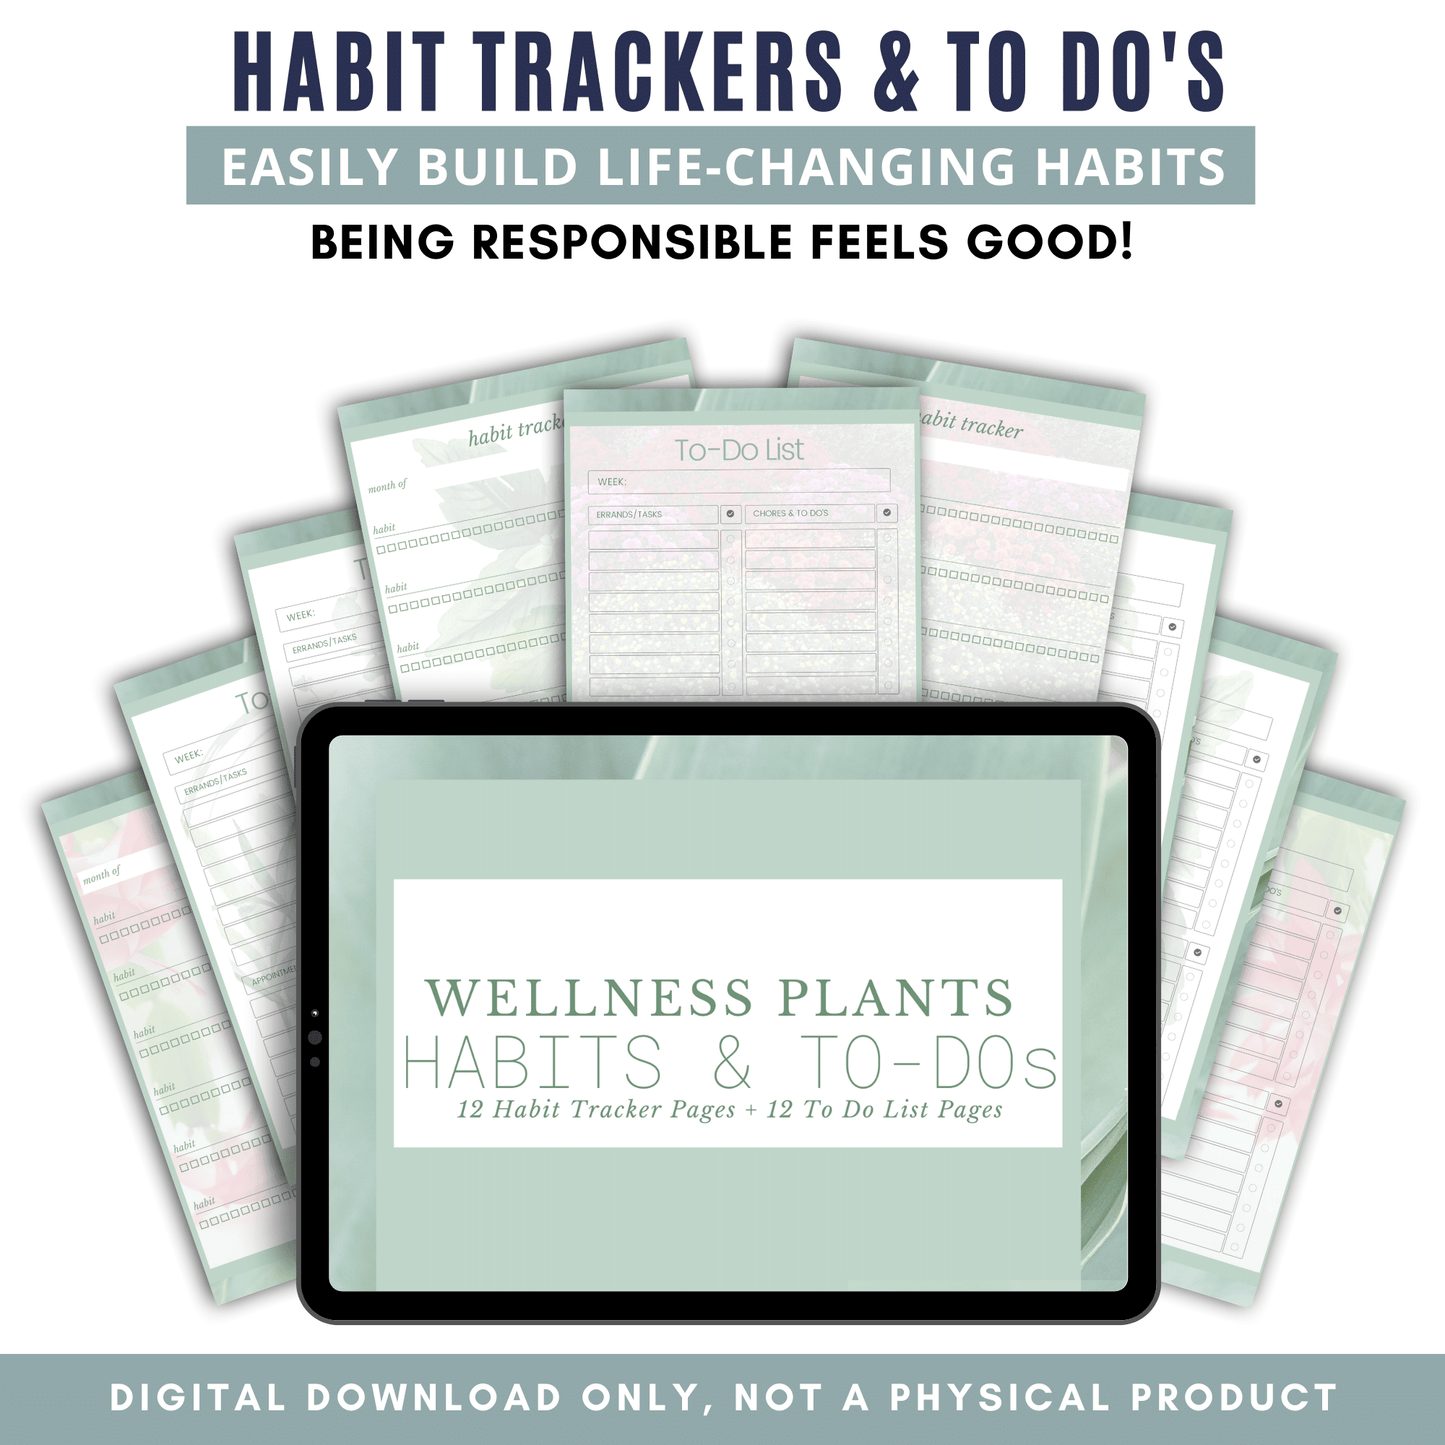 Habit Trackers & To Do's - Wellness Plants - Green Background